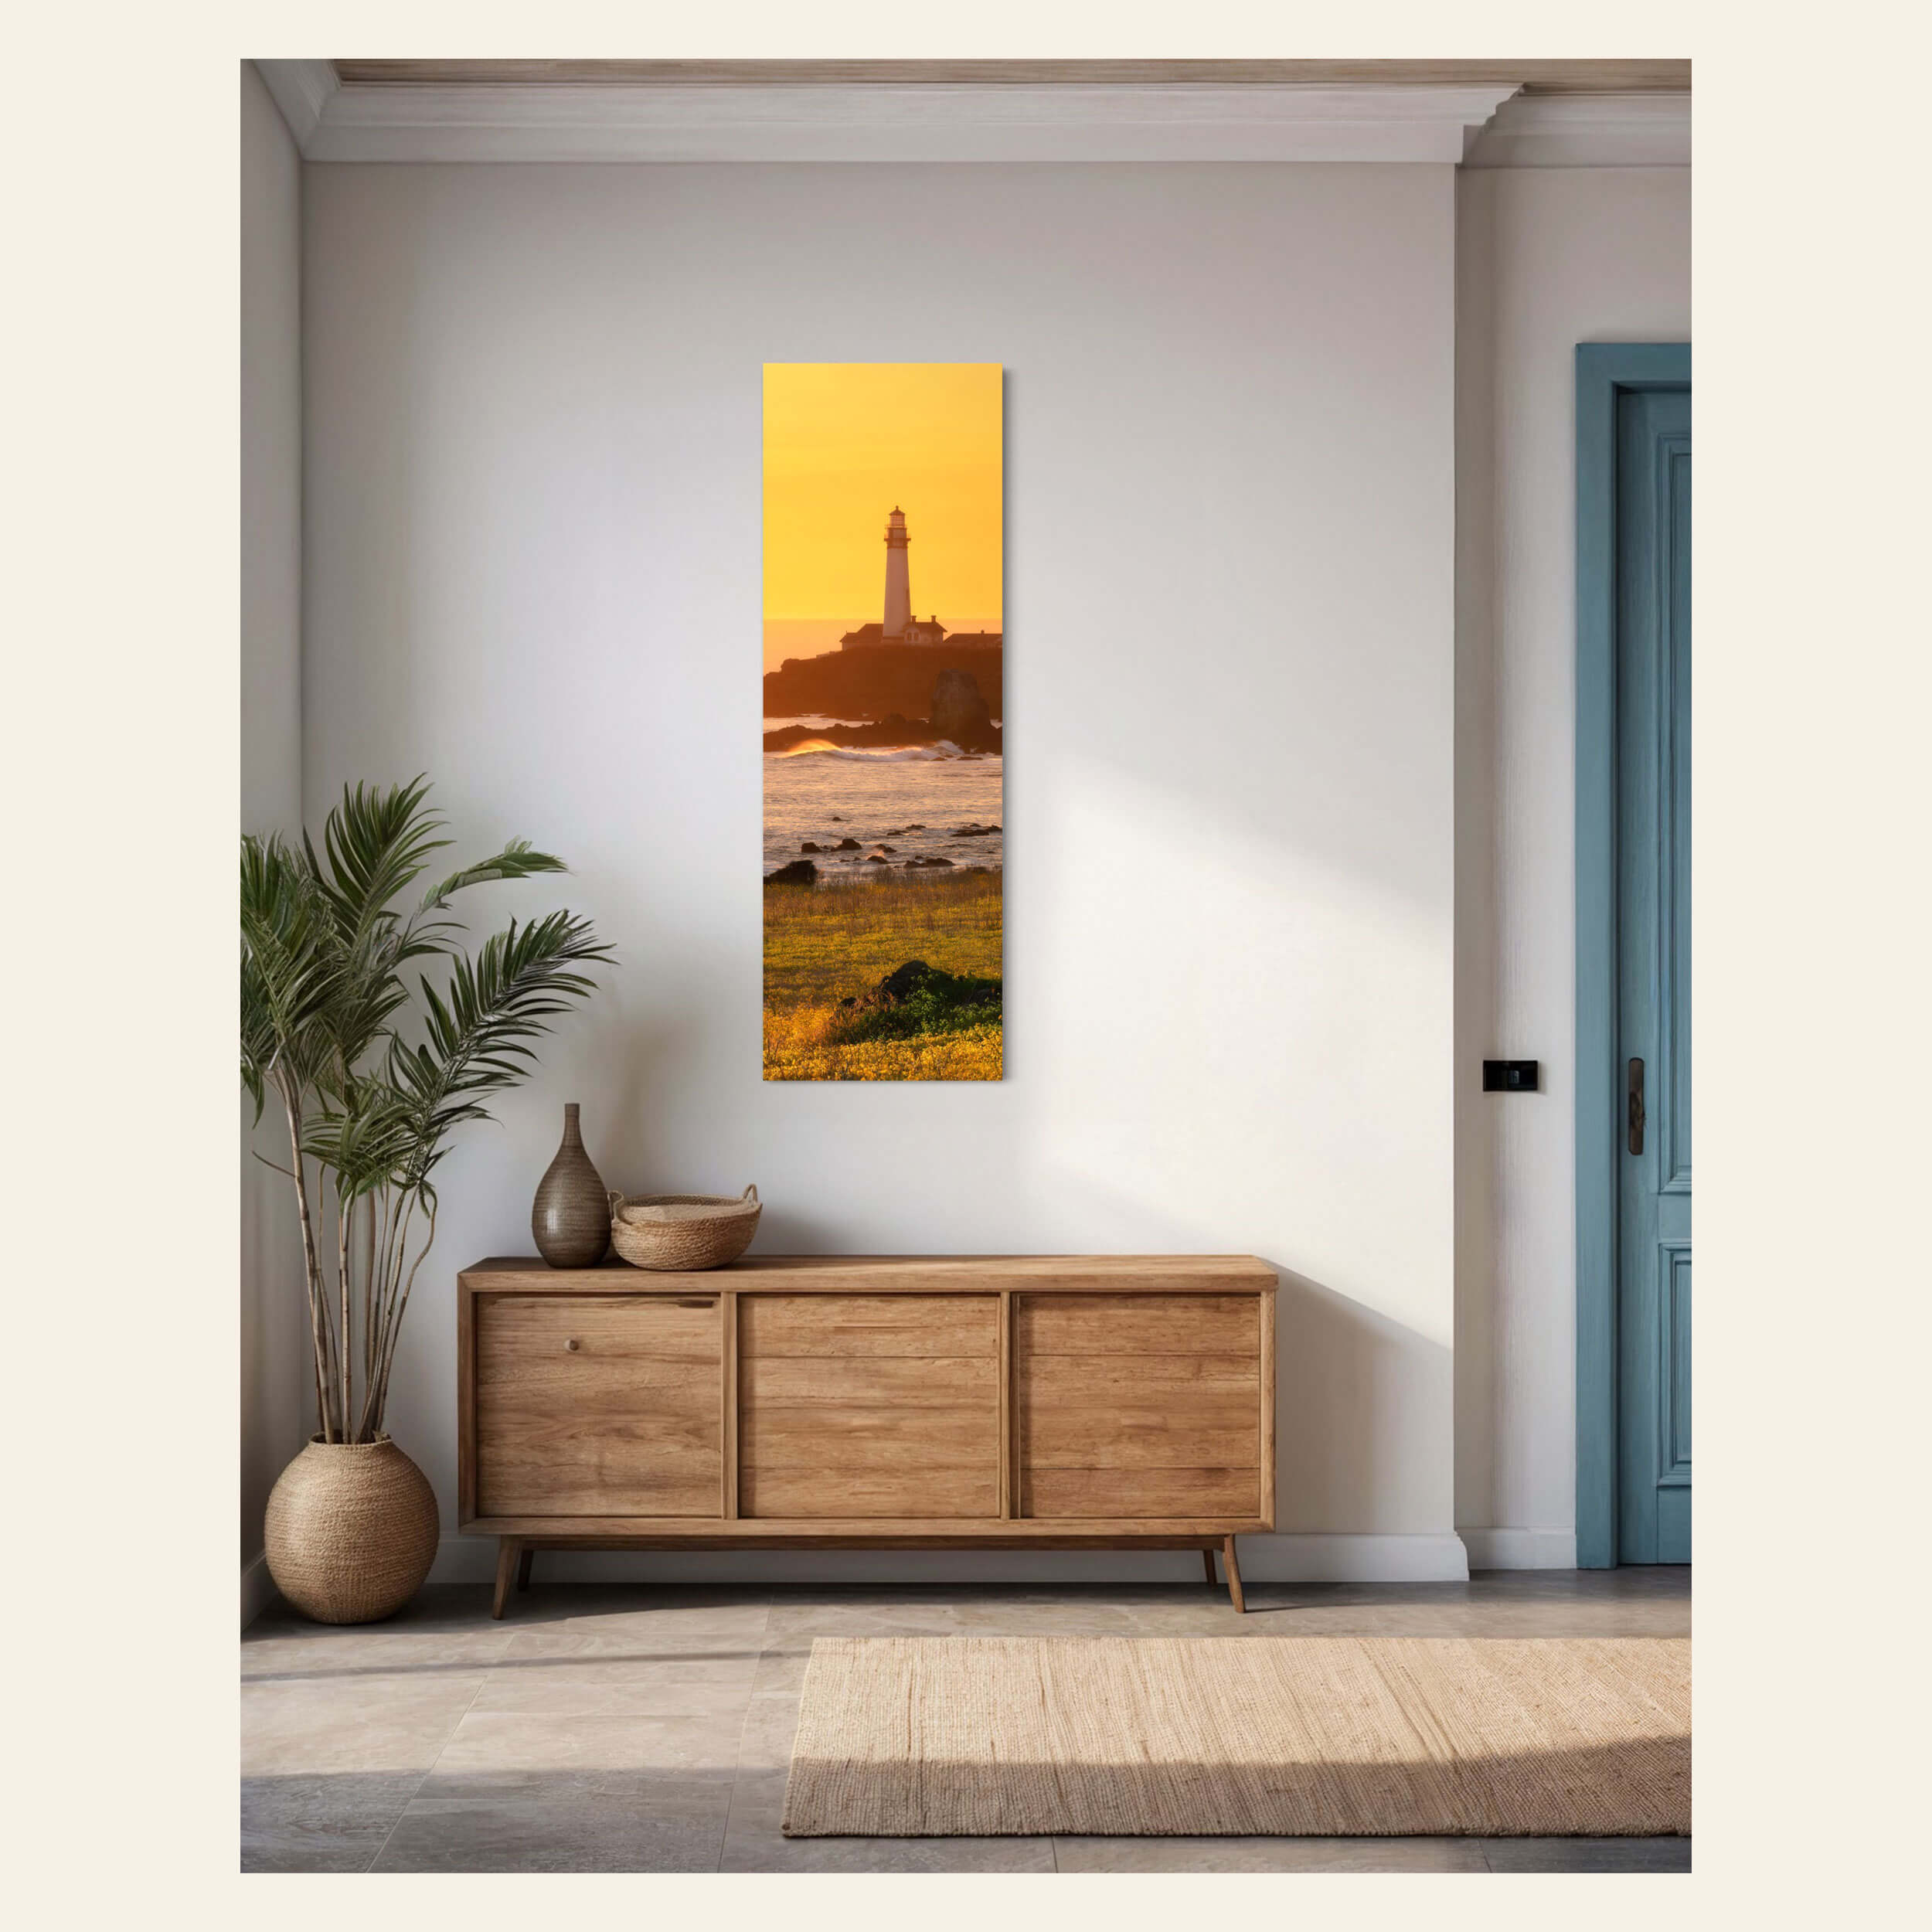 A sunset picture from Pigeon Point Lighthouse in California hangs in an entryway.